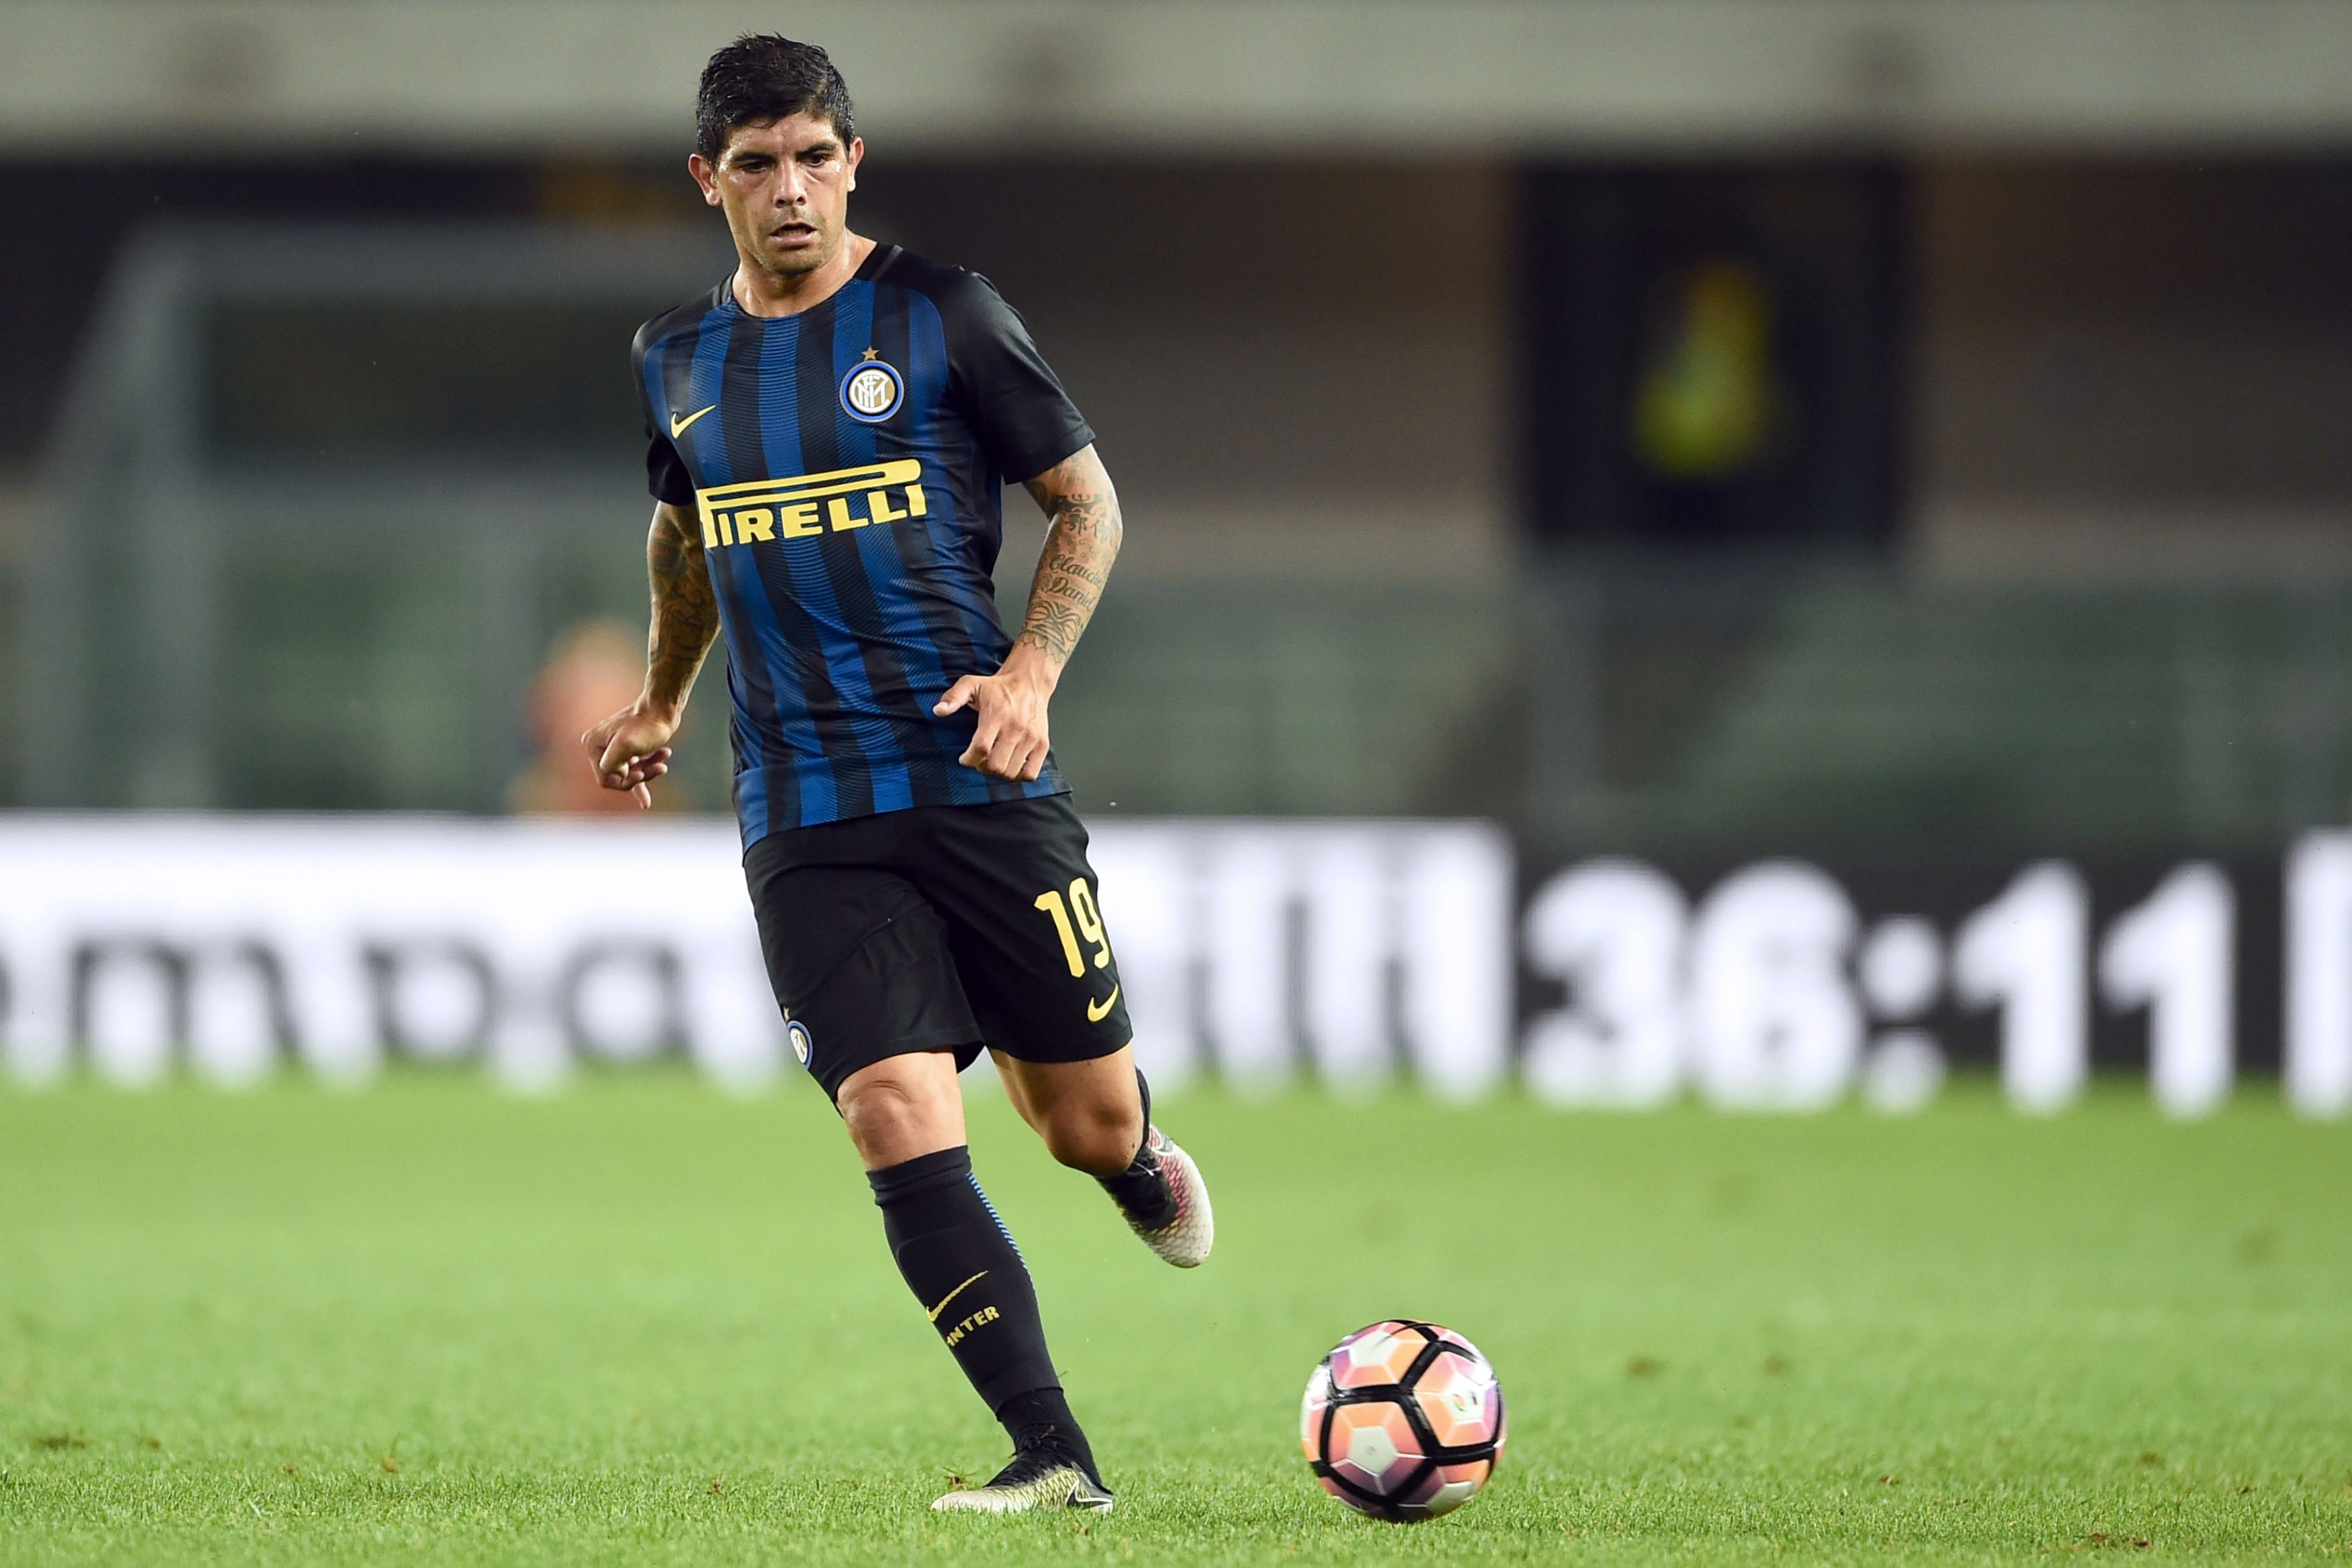 Ever Banega: “We are here to create a winning team”